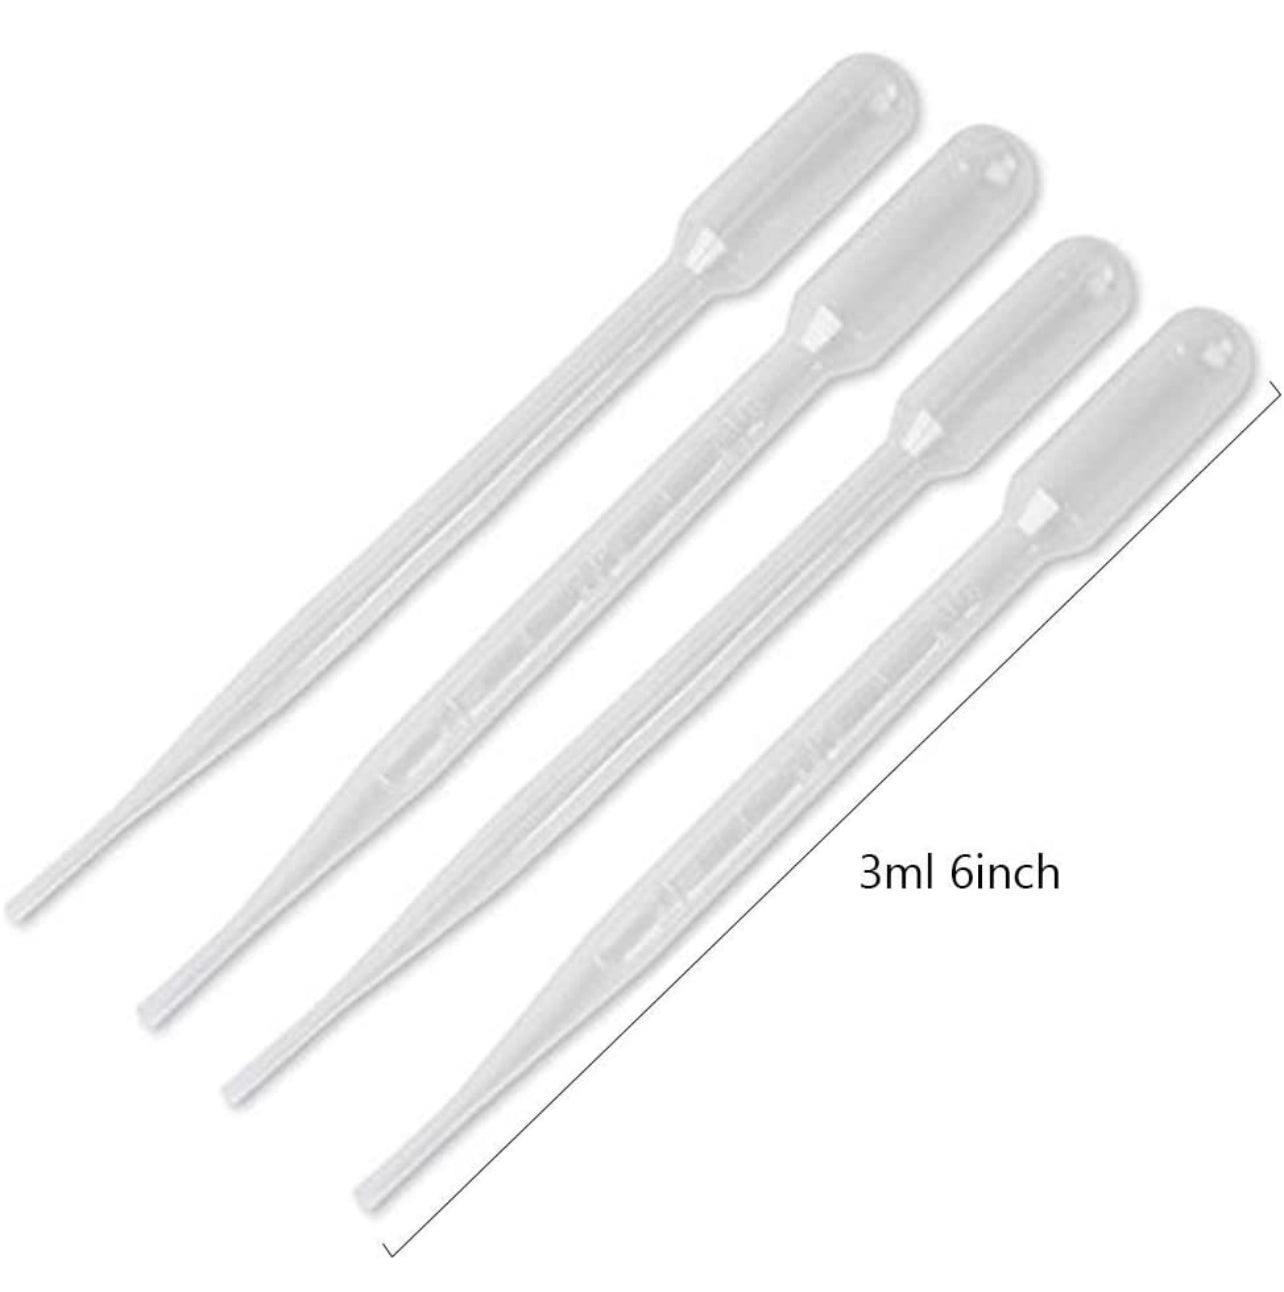 3ml Plastic Pipettes - Pack of 5